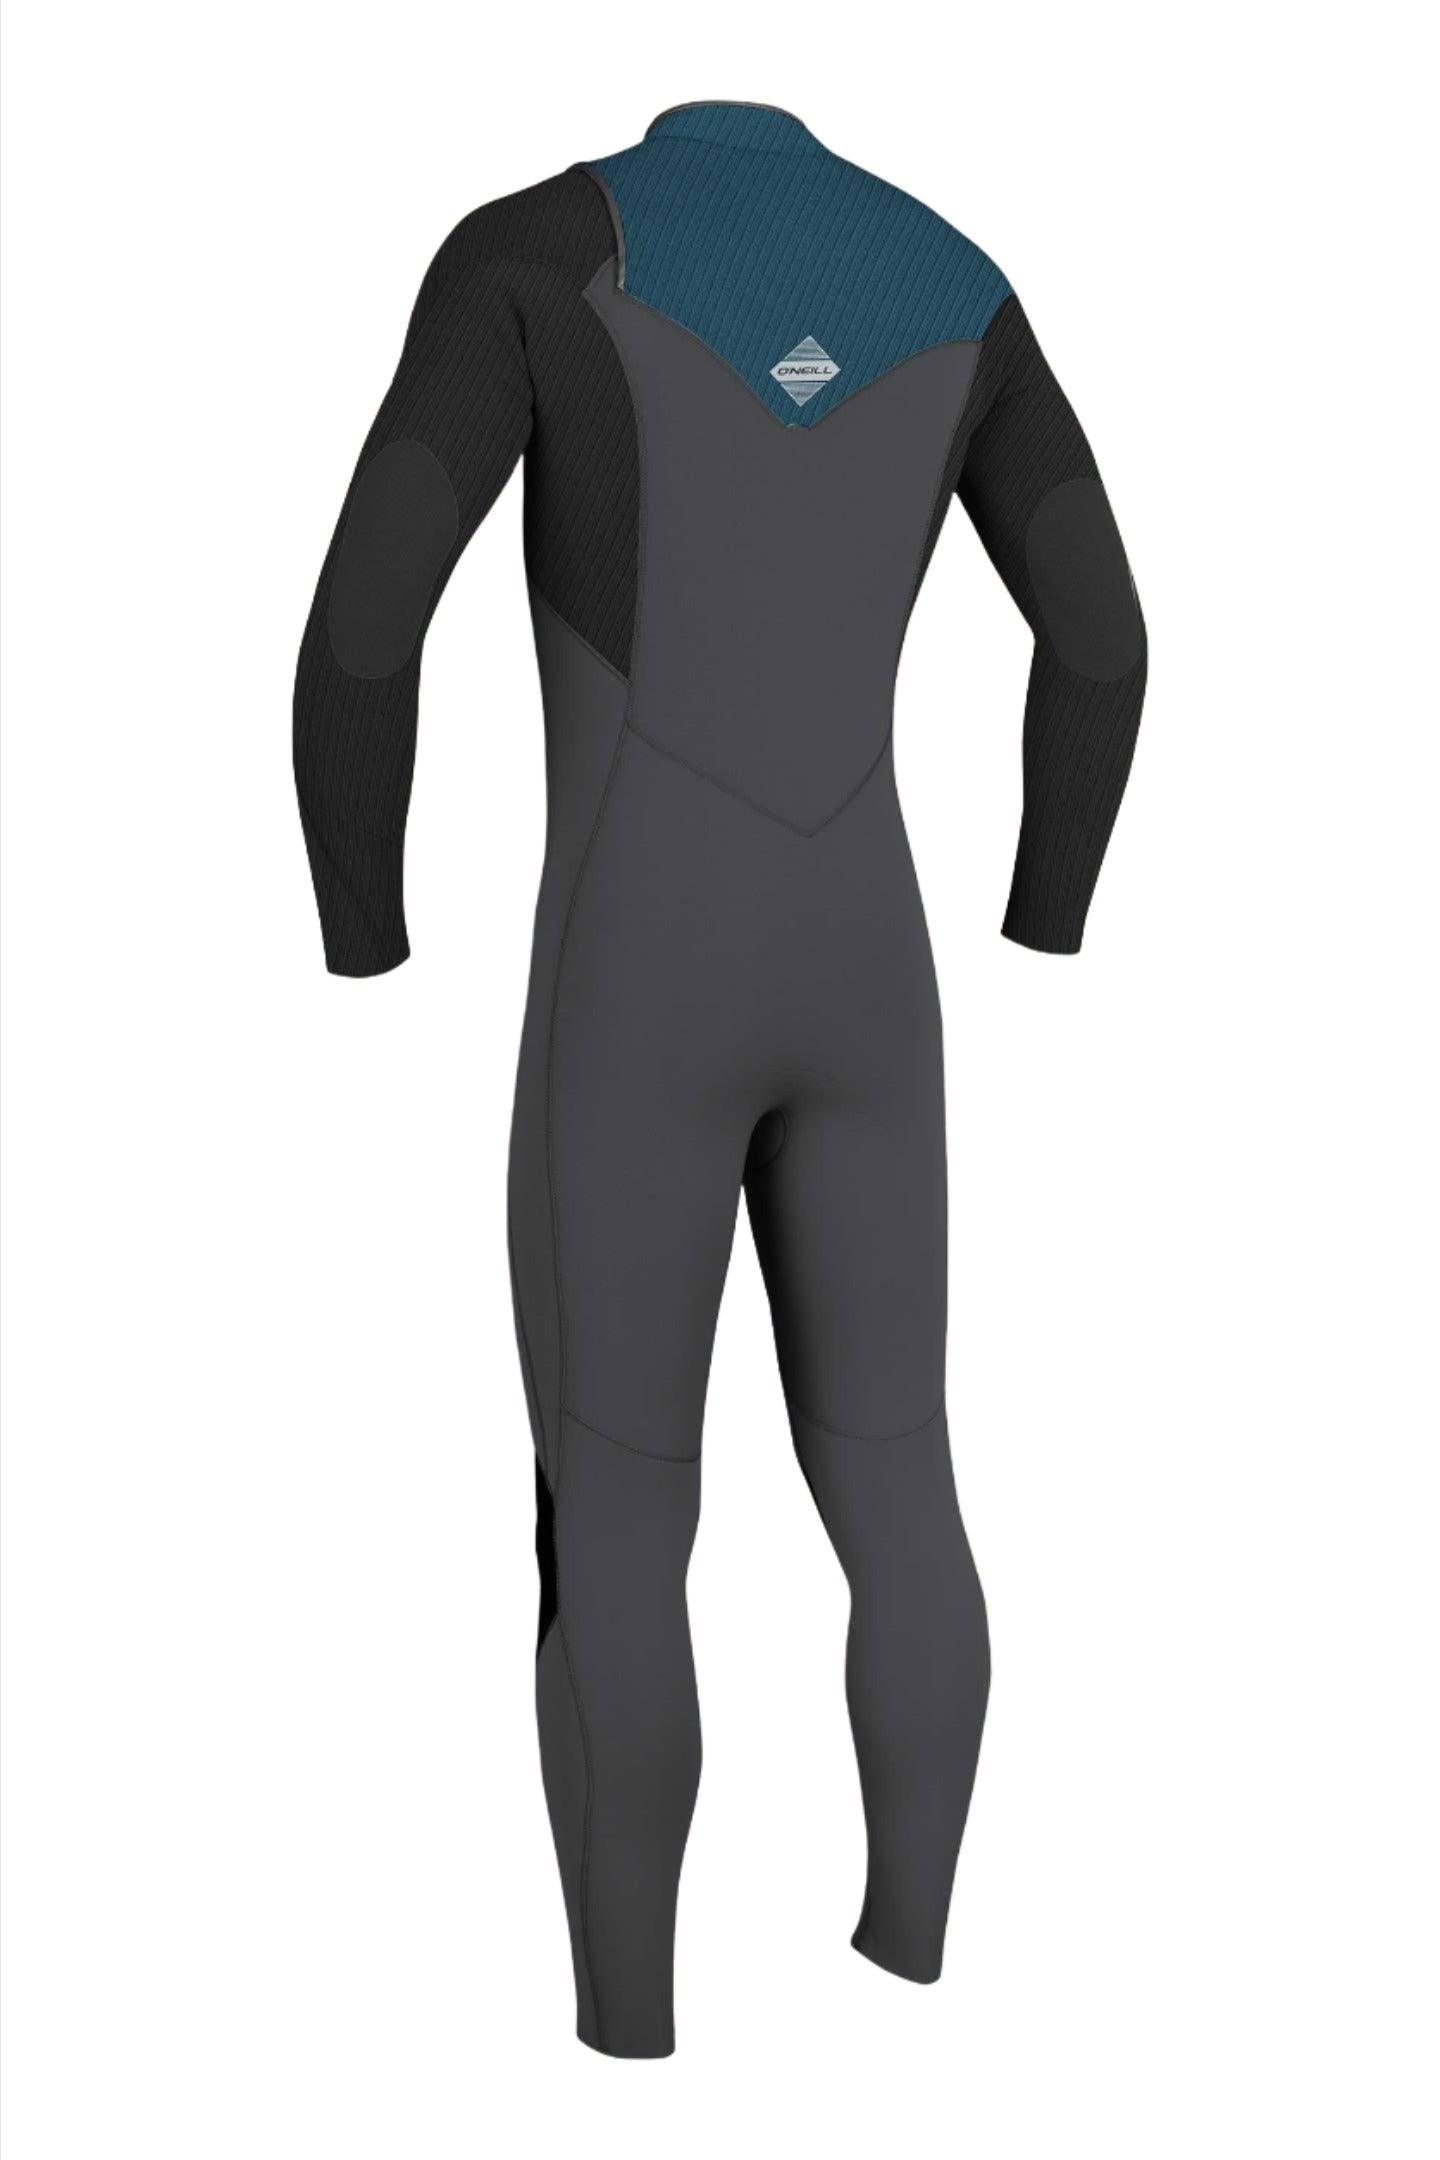 O'NEILL YOUTH 4/3MM+ HYPERFREAK CHEST ZIP WETSUIT